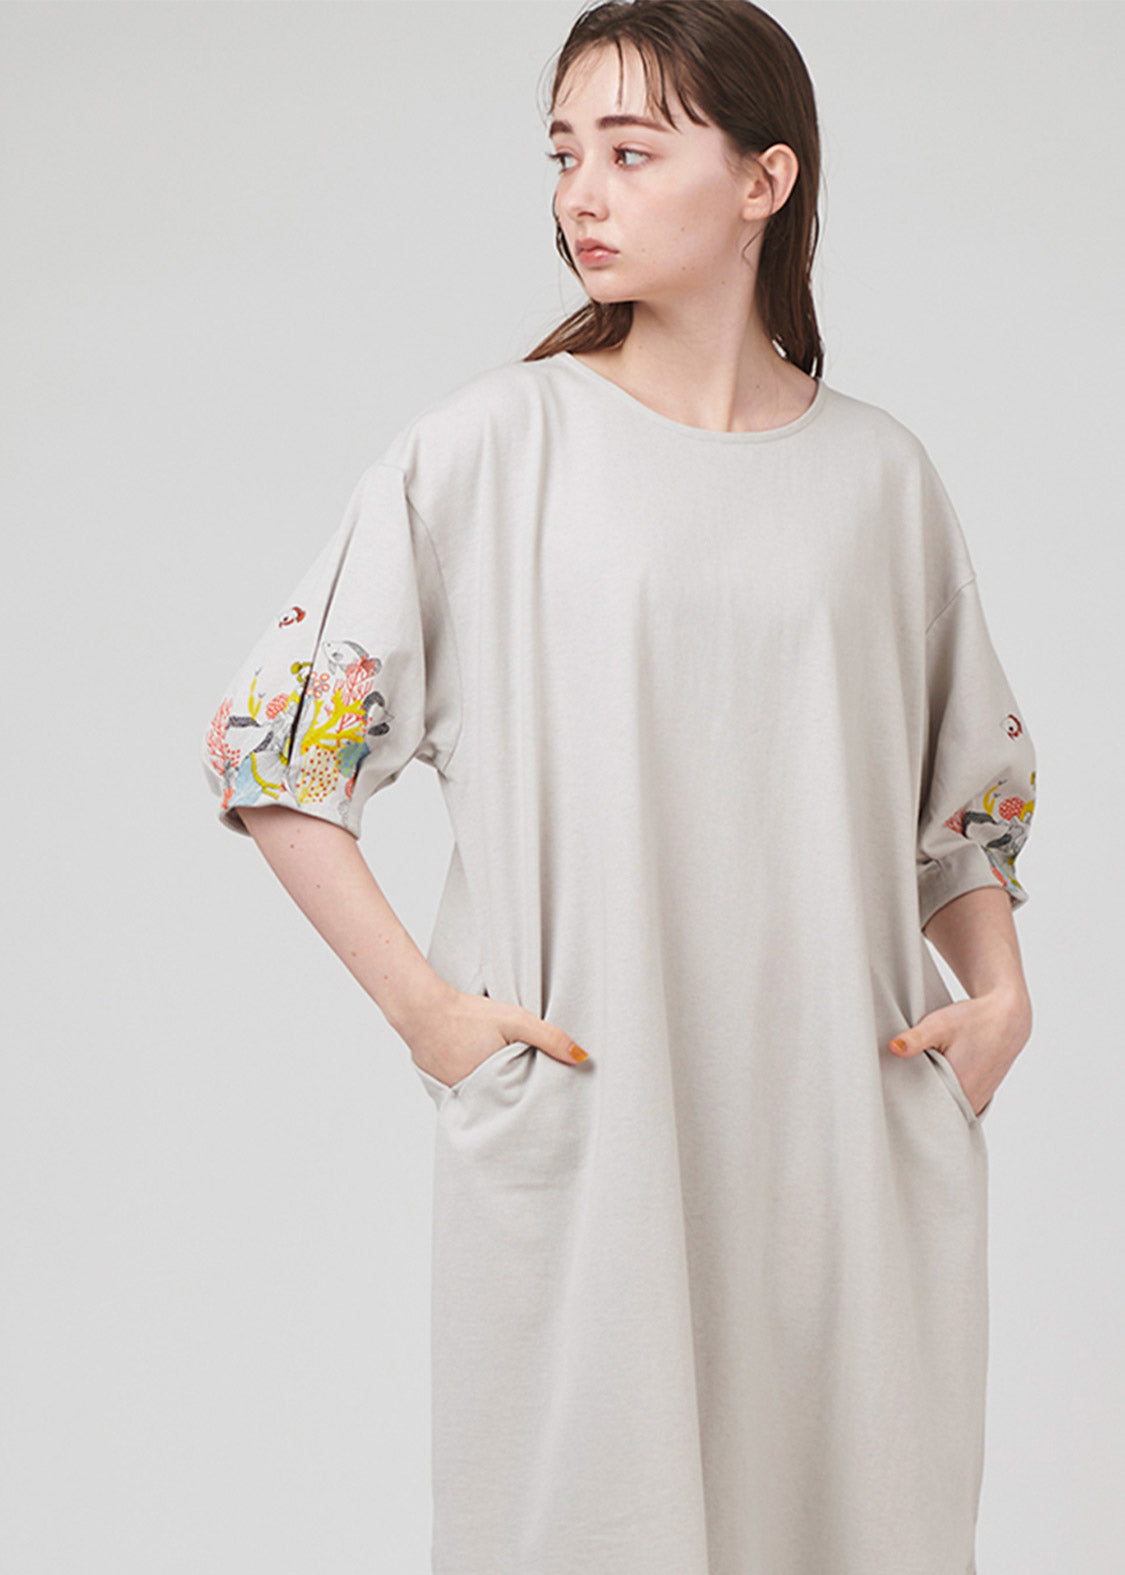 Volume Sleeve One-Piece (Landscape of Coral Reef)